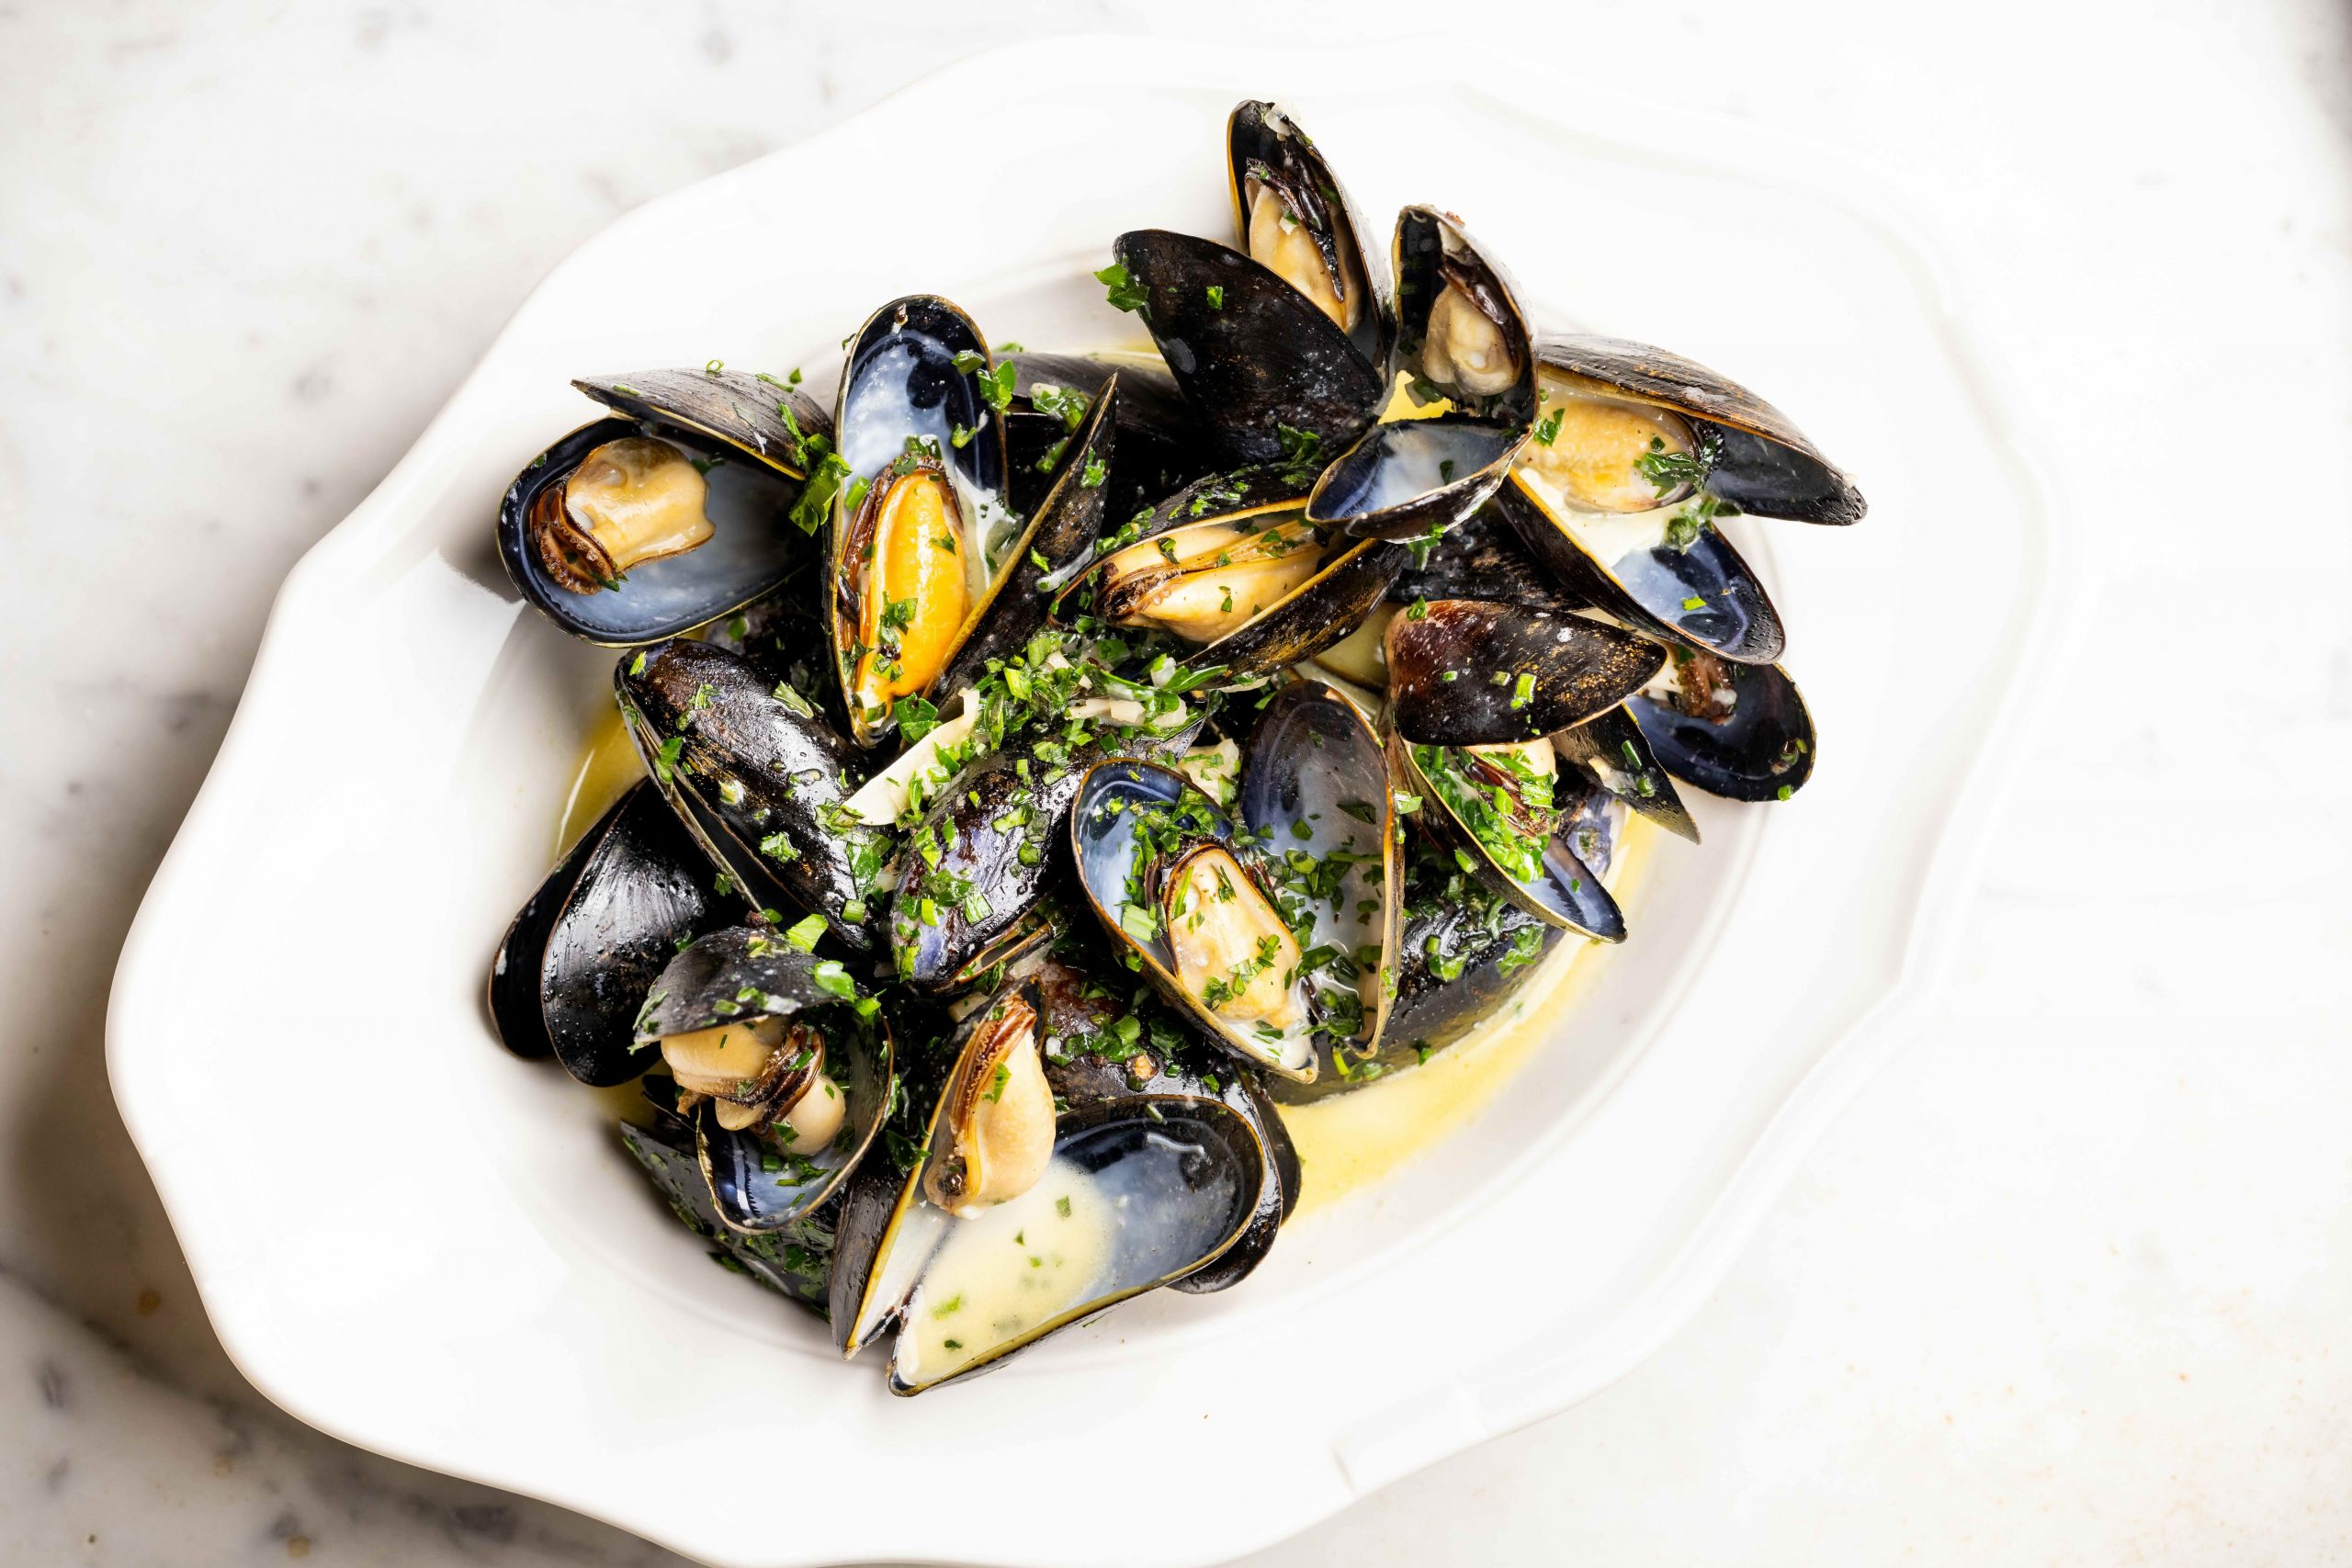 Mussels at Shirley Brasserie - Los Angeles